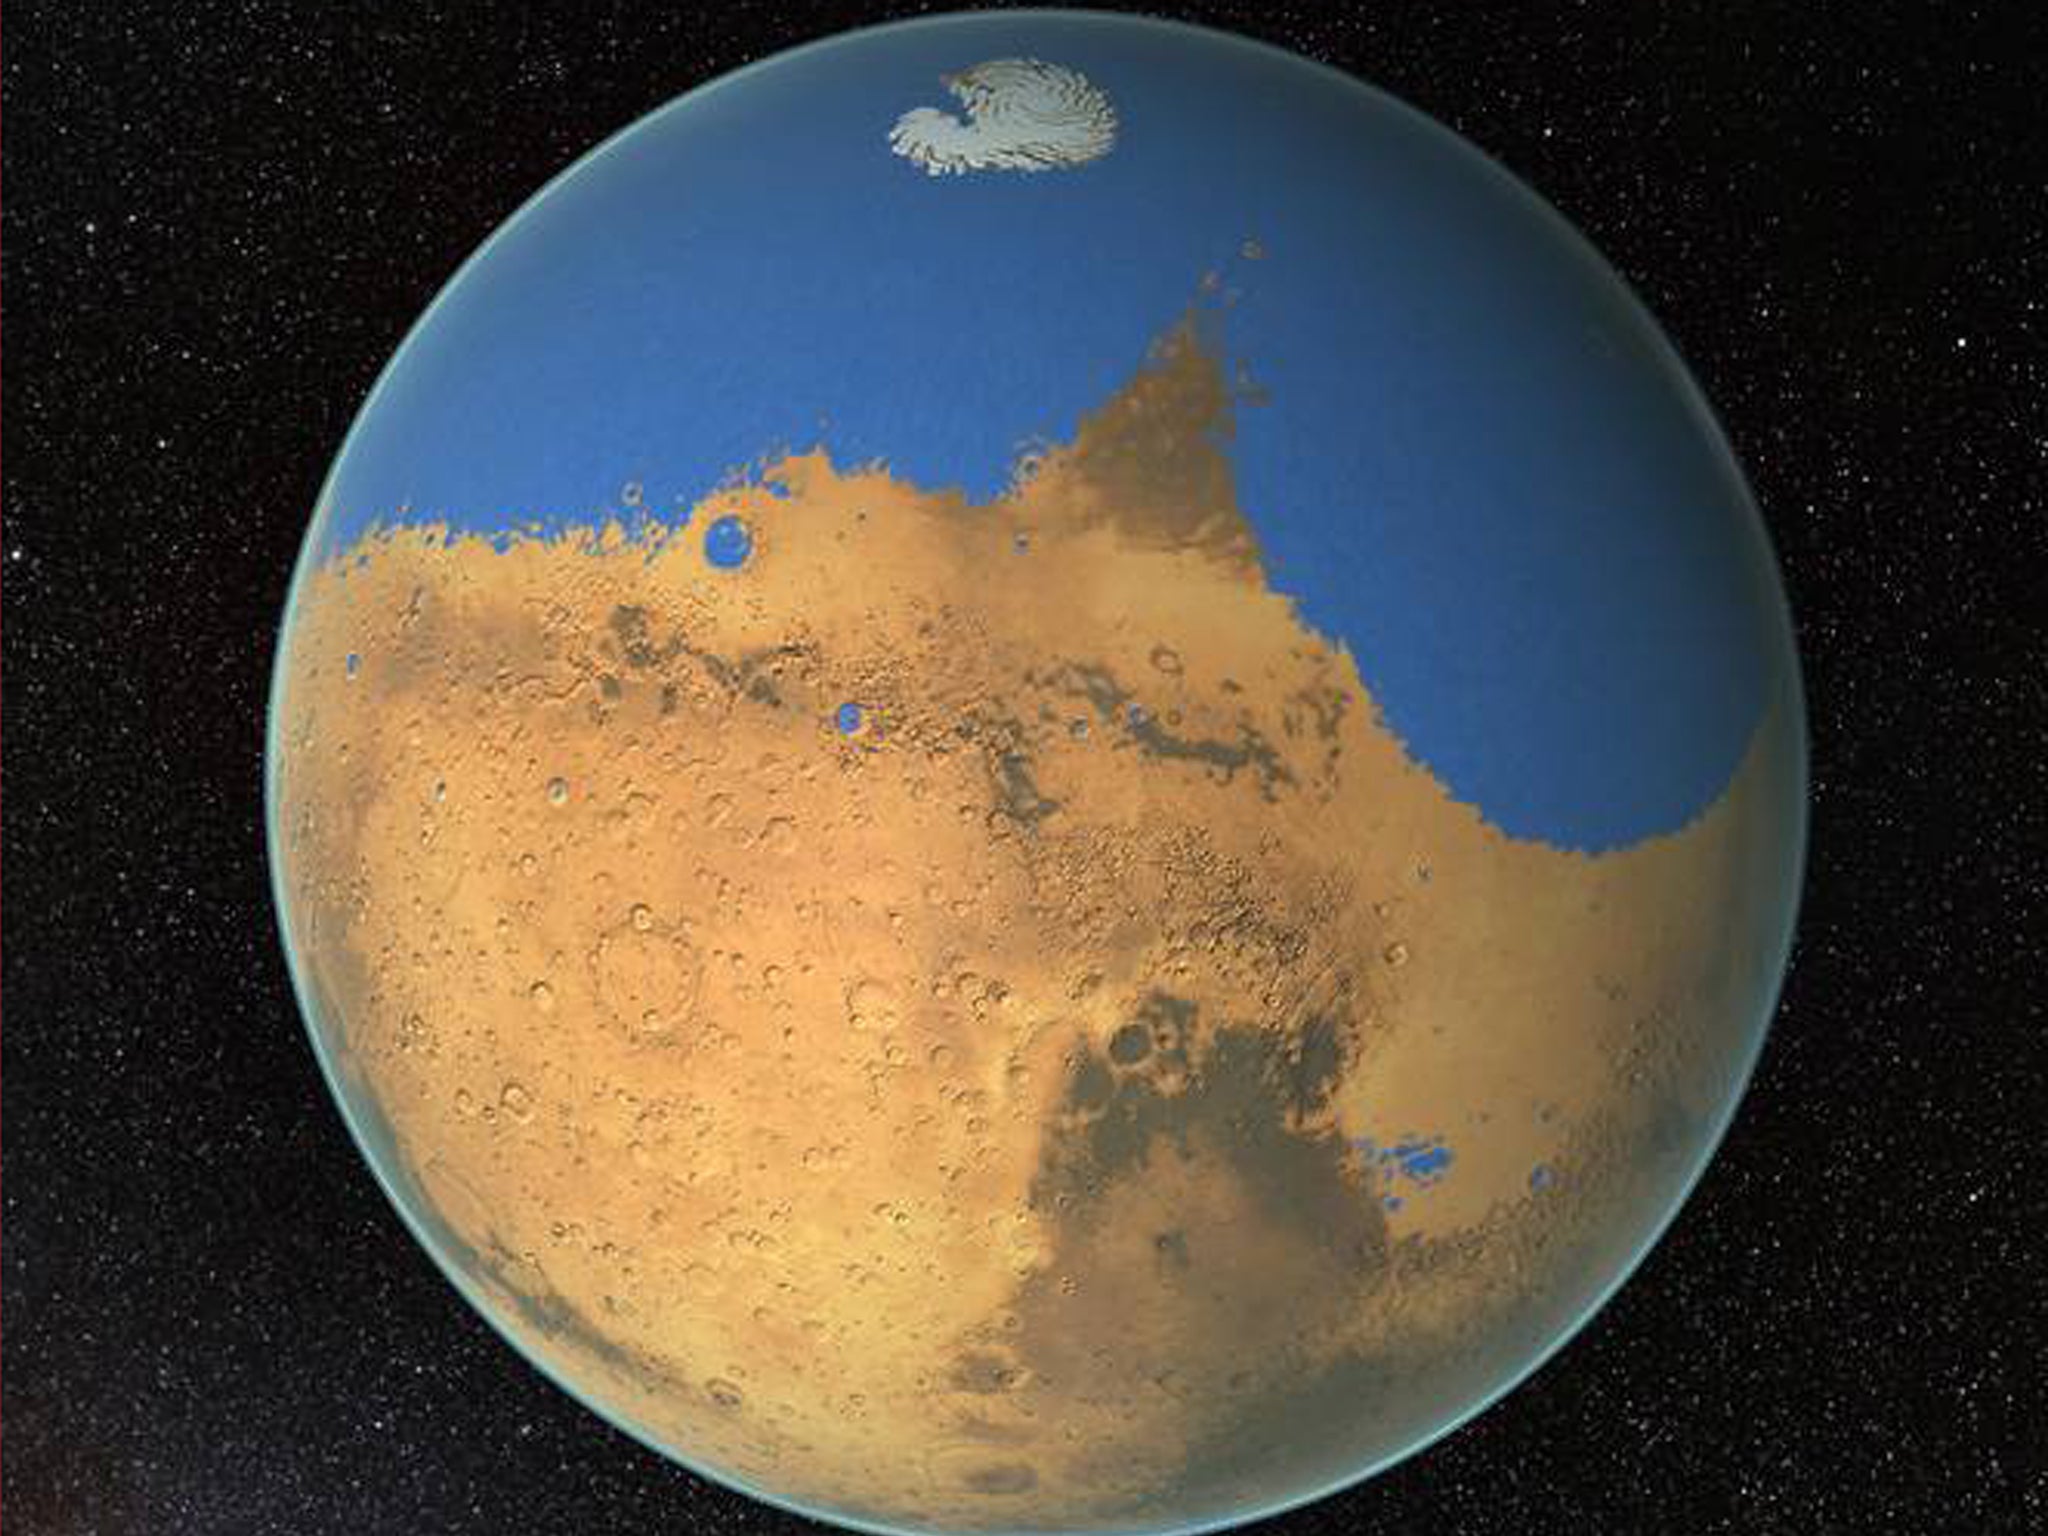 NASA scientists have determined that a primitive ocean on Mars held more water than Earth's Arctic Ocean and that the Red Planet has lost 87 percent of that water to space